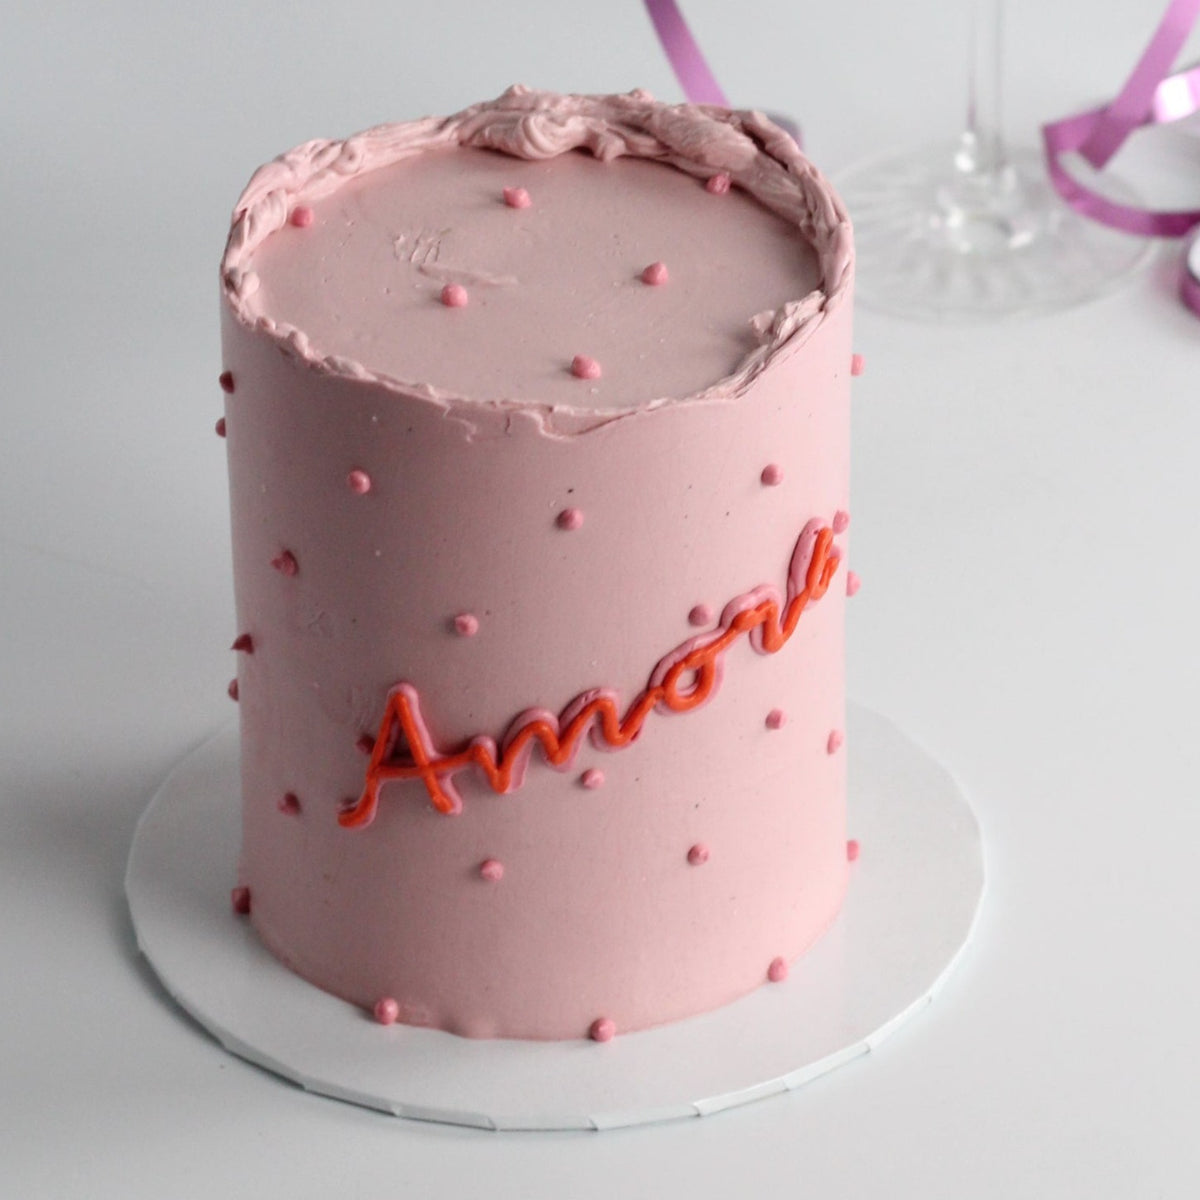 Celebrate love with our pink AMORE cake!